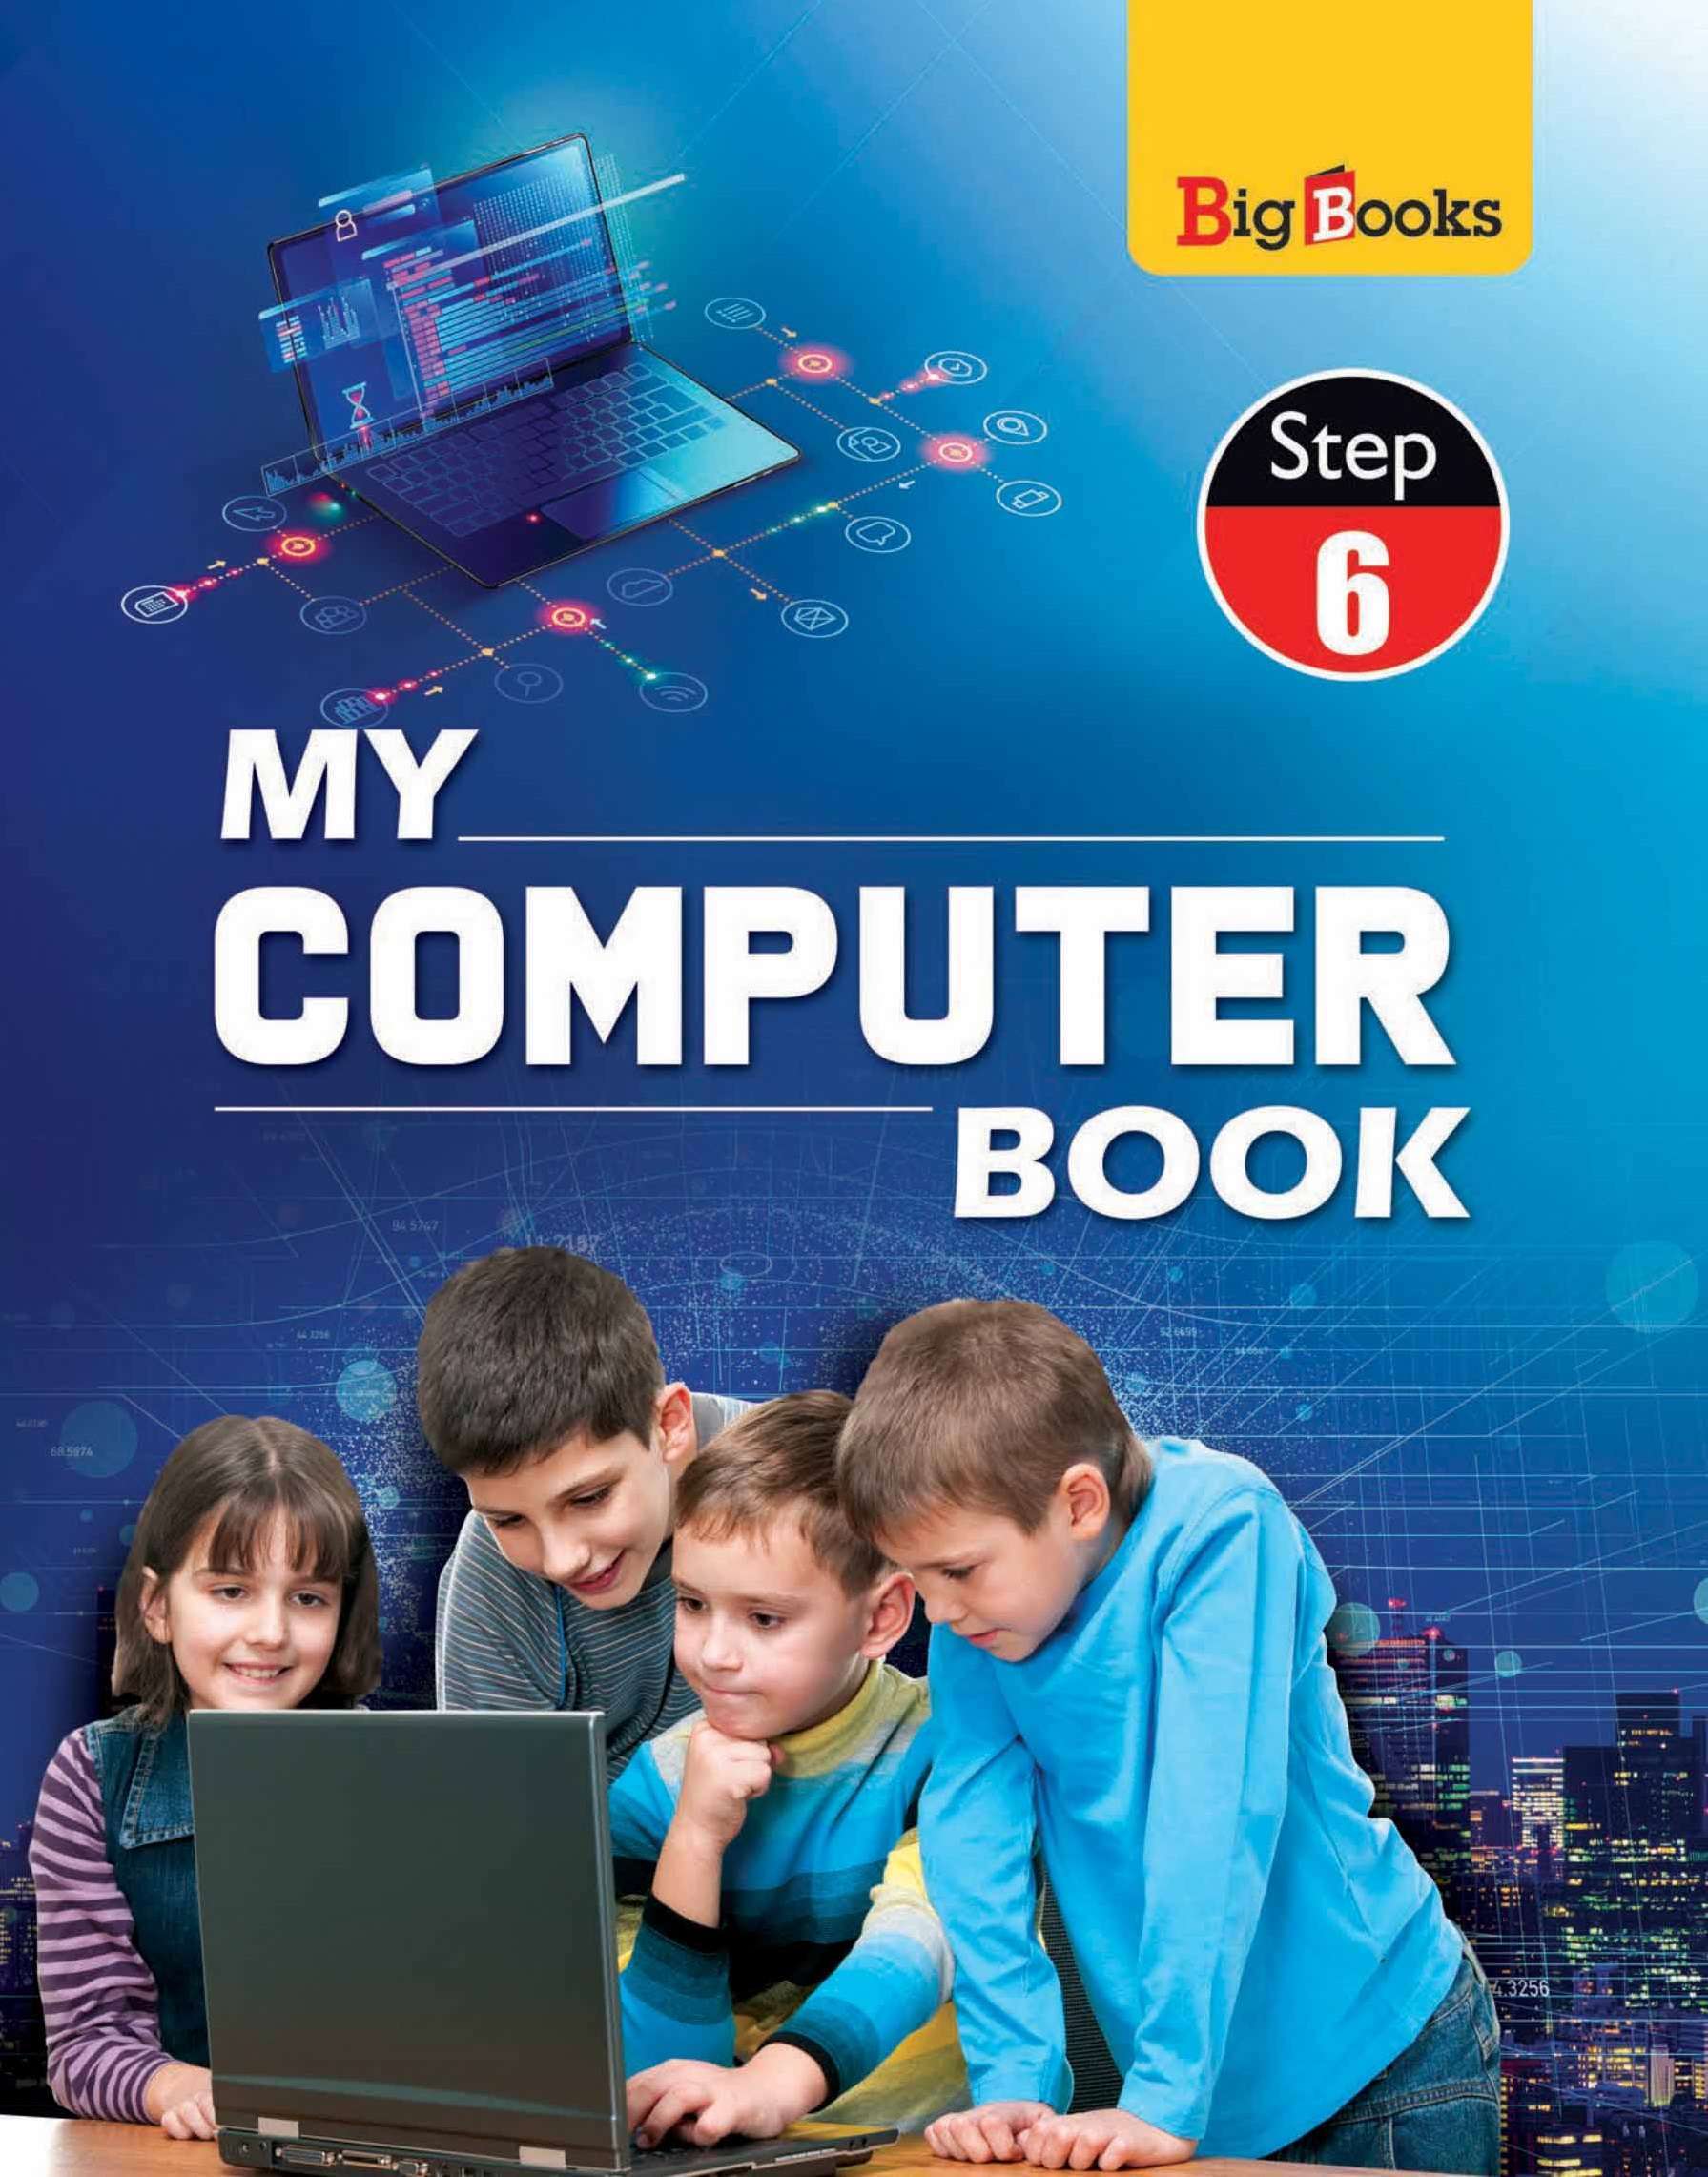 Buy computer books for 6 online